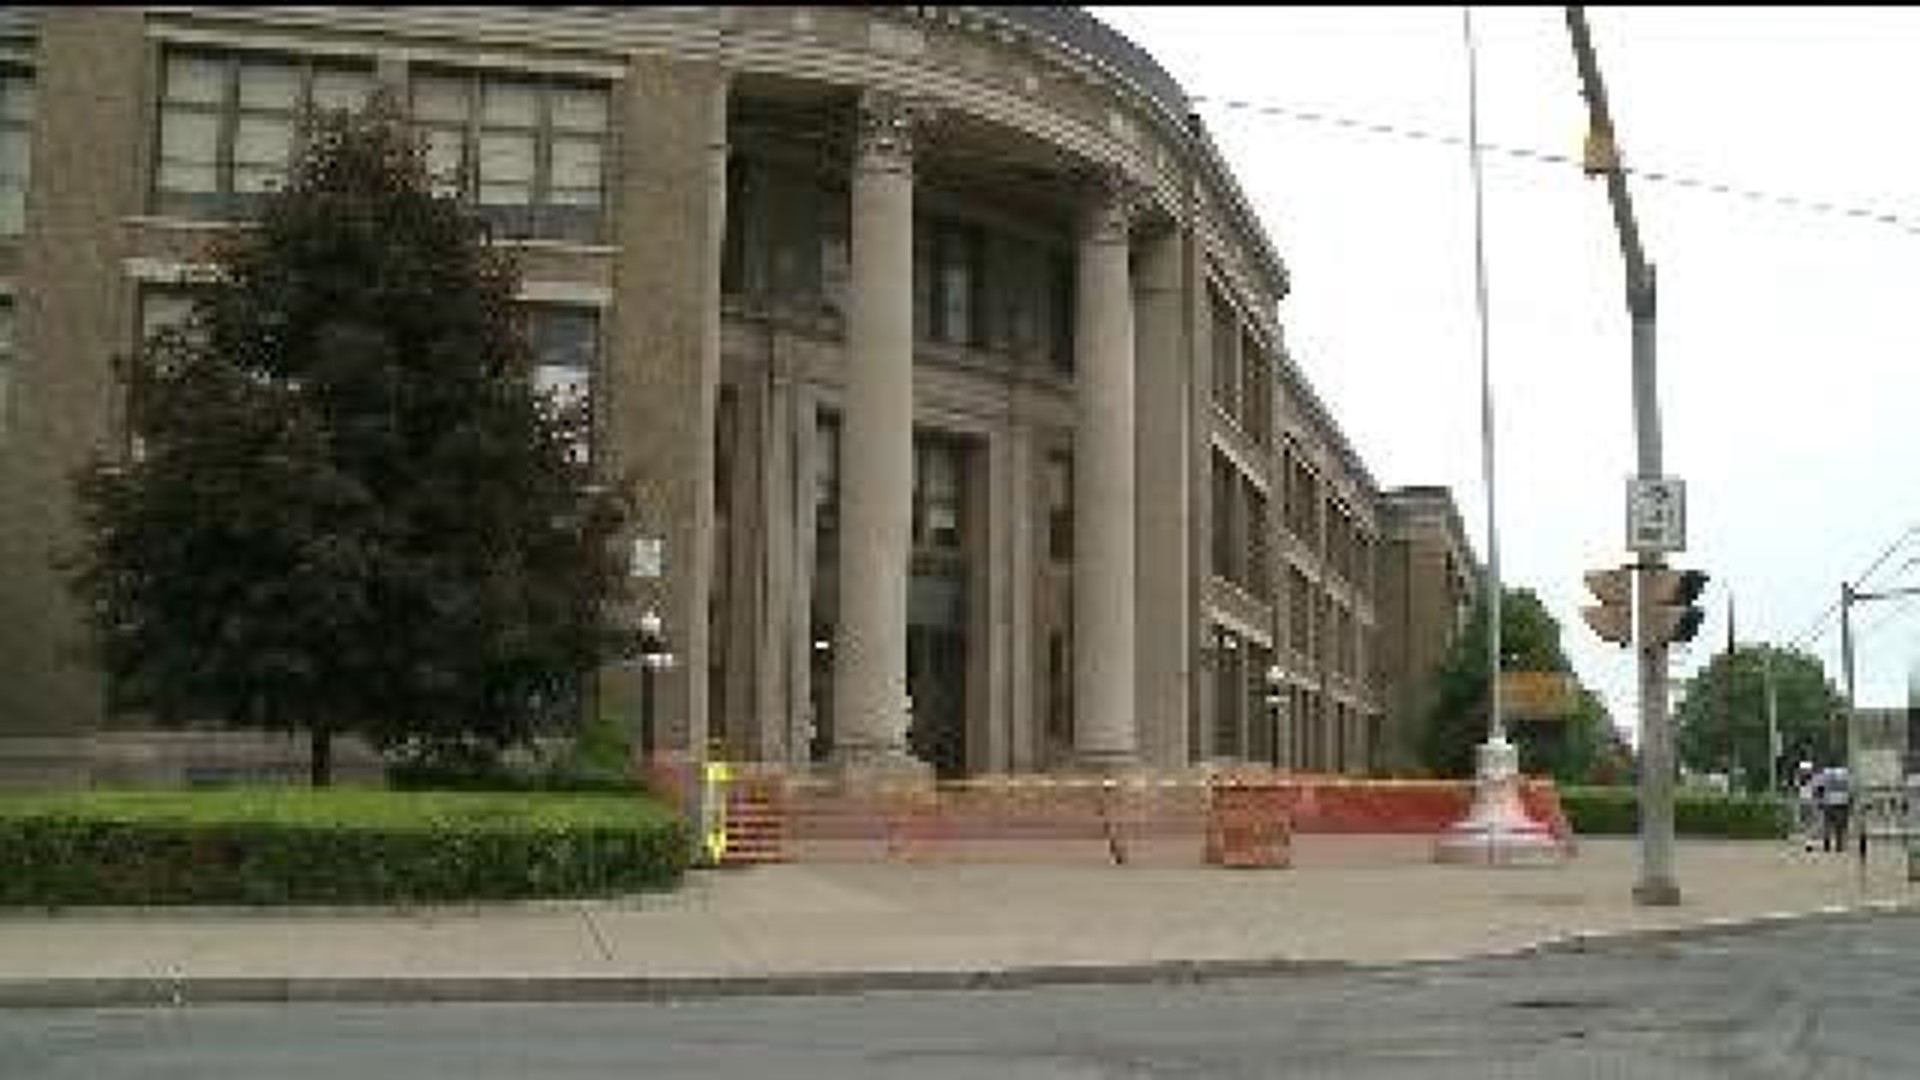 STRUCTUAL CONCERNS AT SECOND HIGH SCHOOL IN W-B